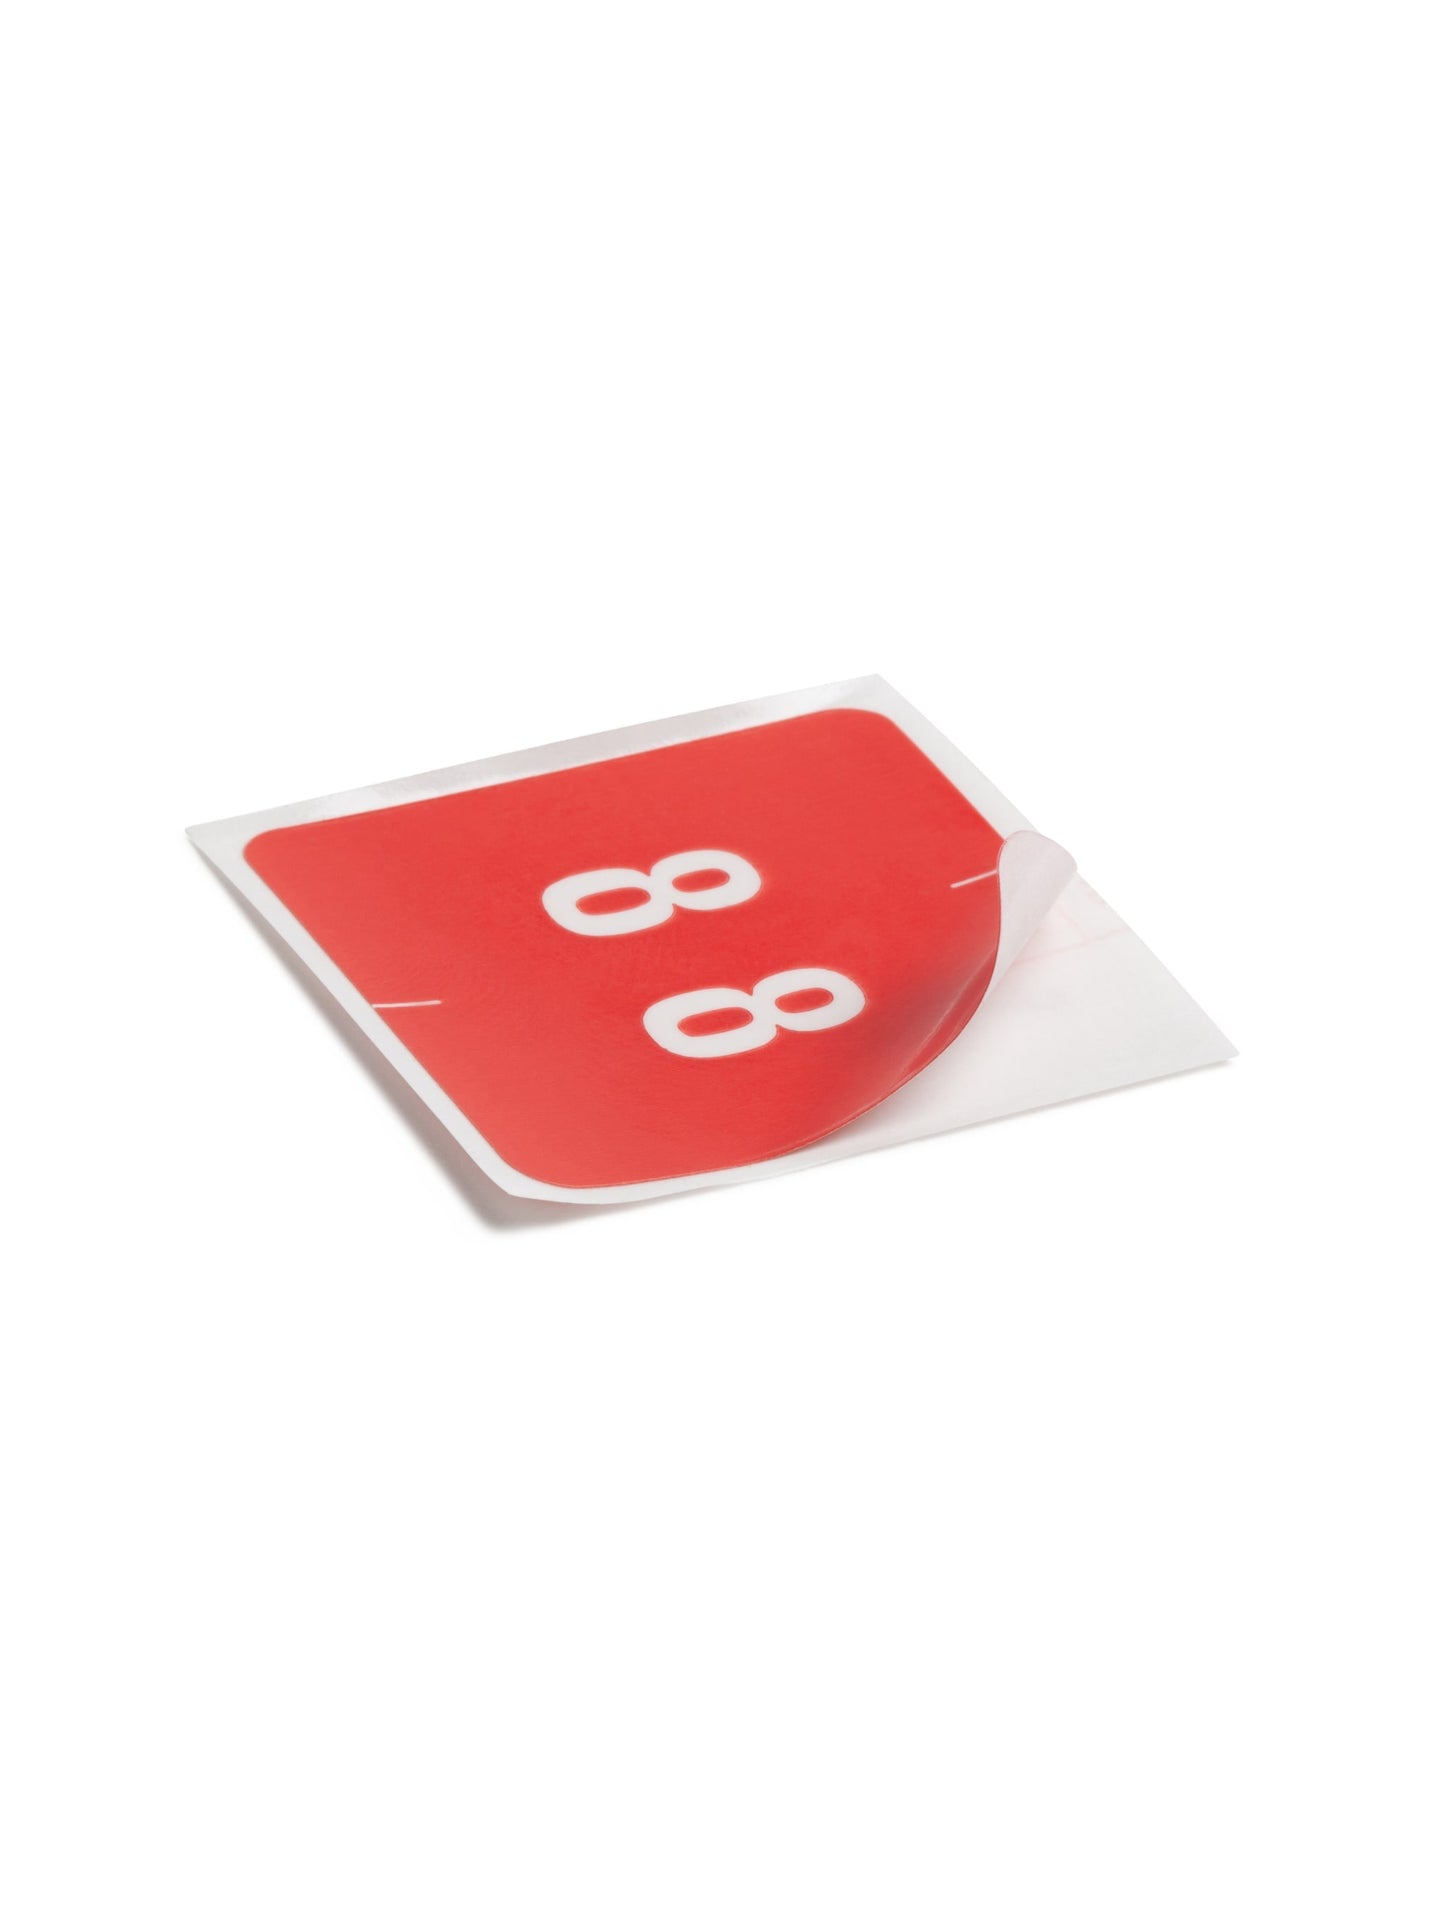 DCC Color-Coded Numeric Labels - Rolls, Red Color, 1-1/2" X 1-1/2" Size, Set of 1, 086486674287